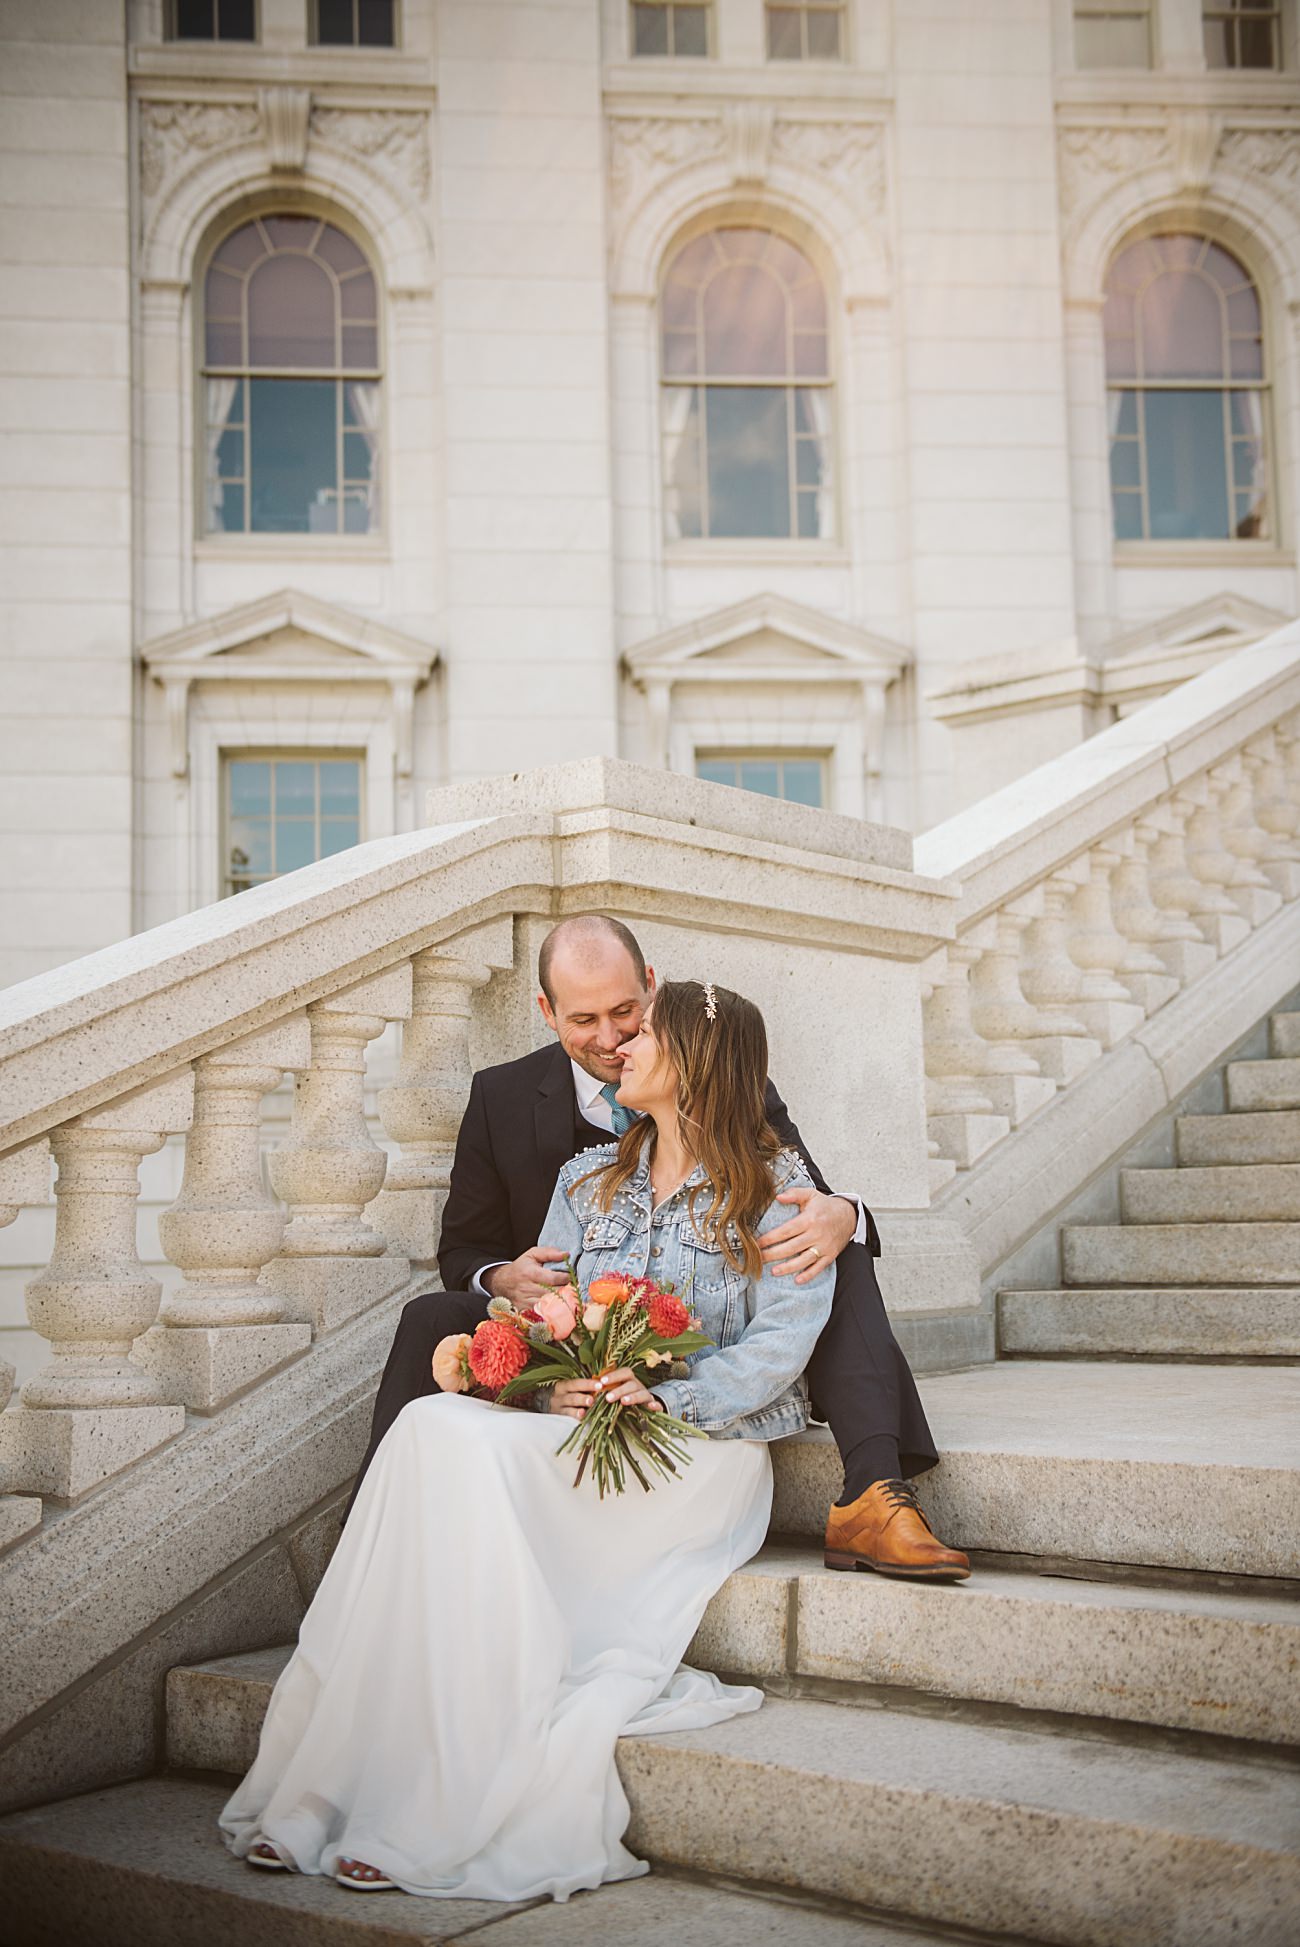 Madison State Capital Elopement, Modern Elopement, Colorful Wedding Bouquet, Madison Elopement Locations